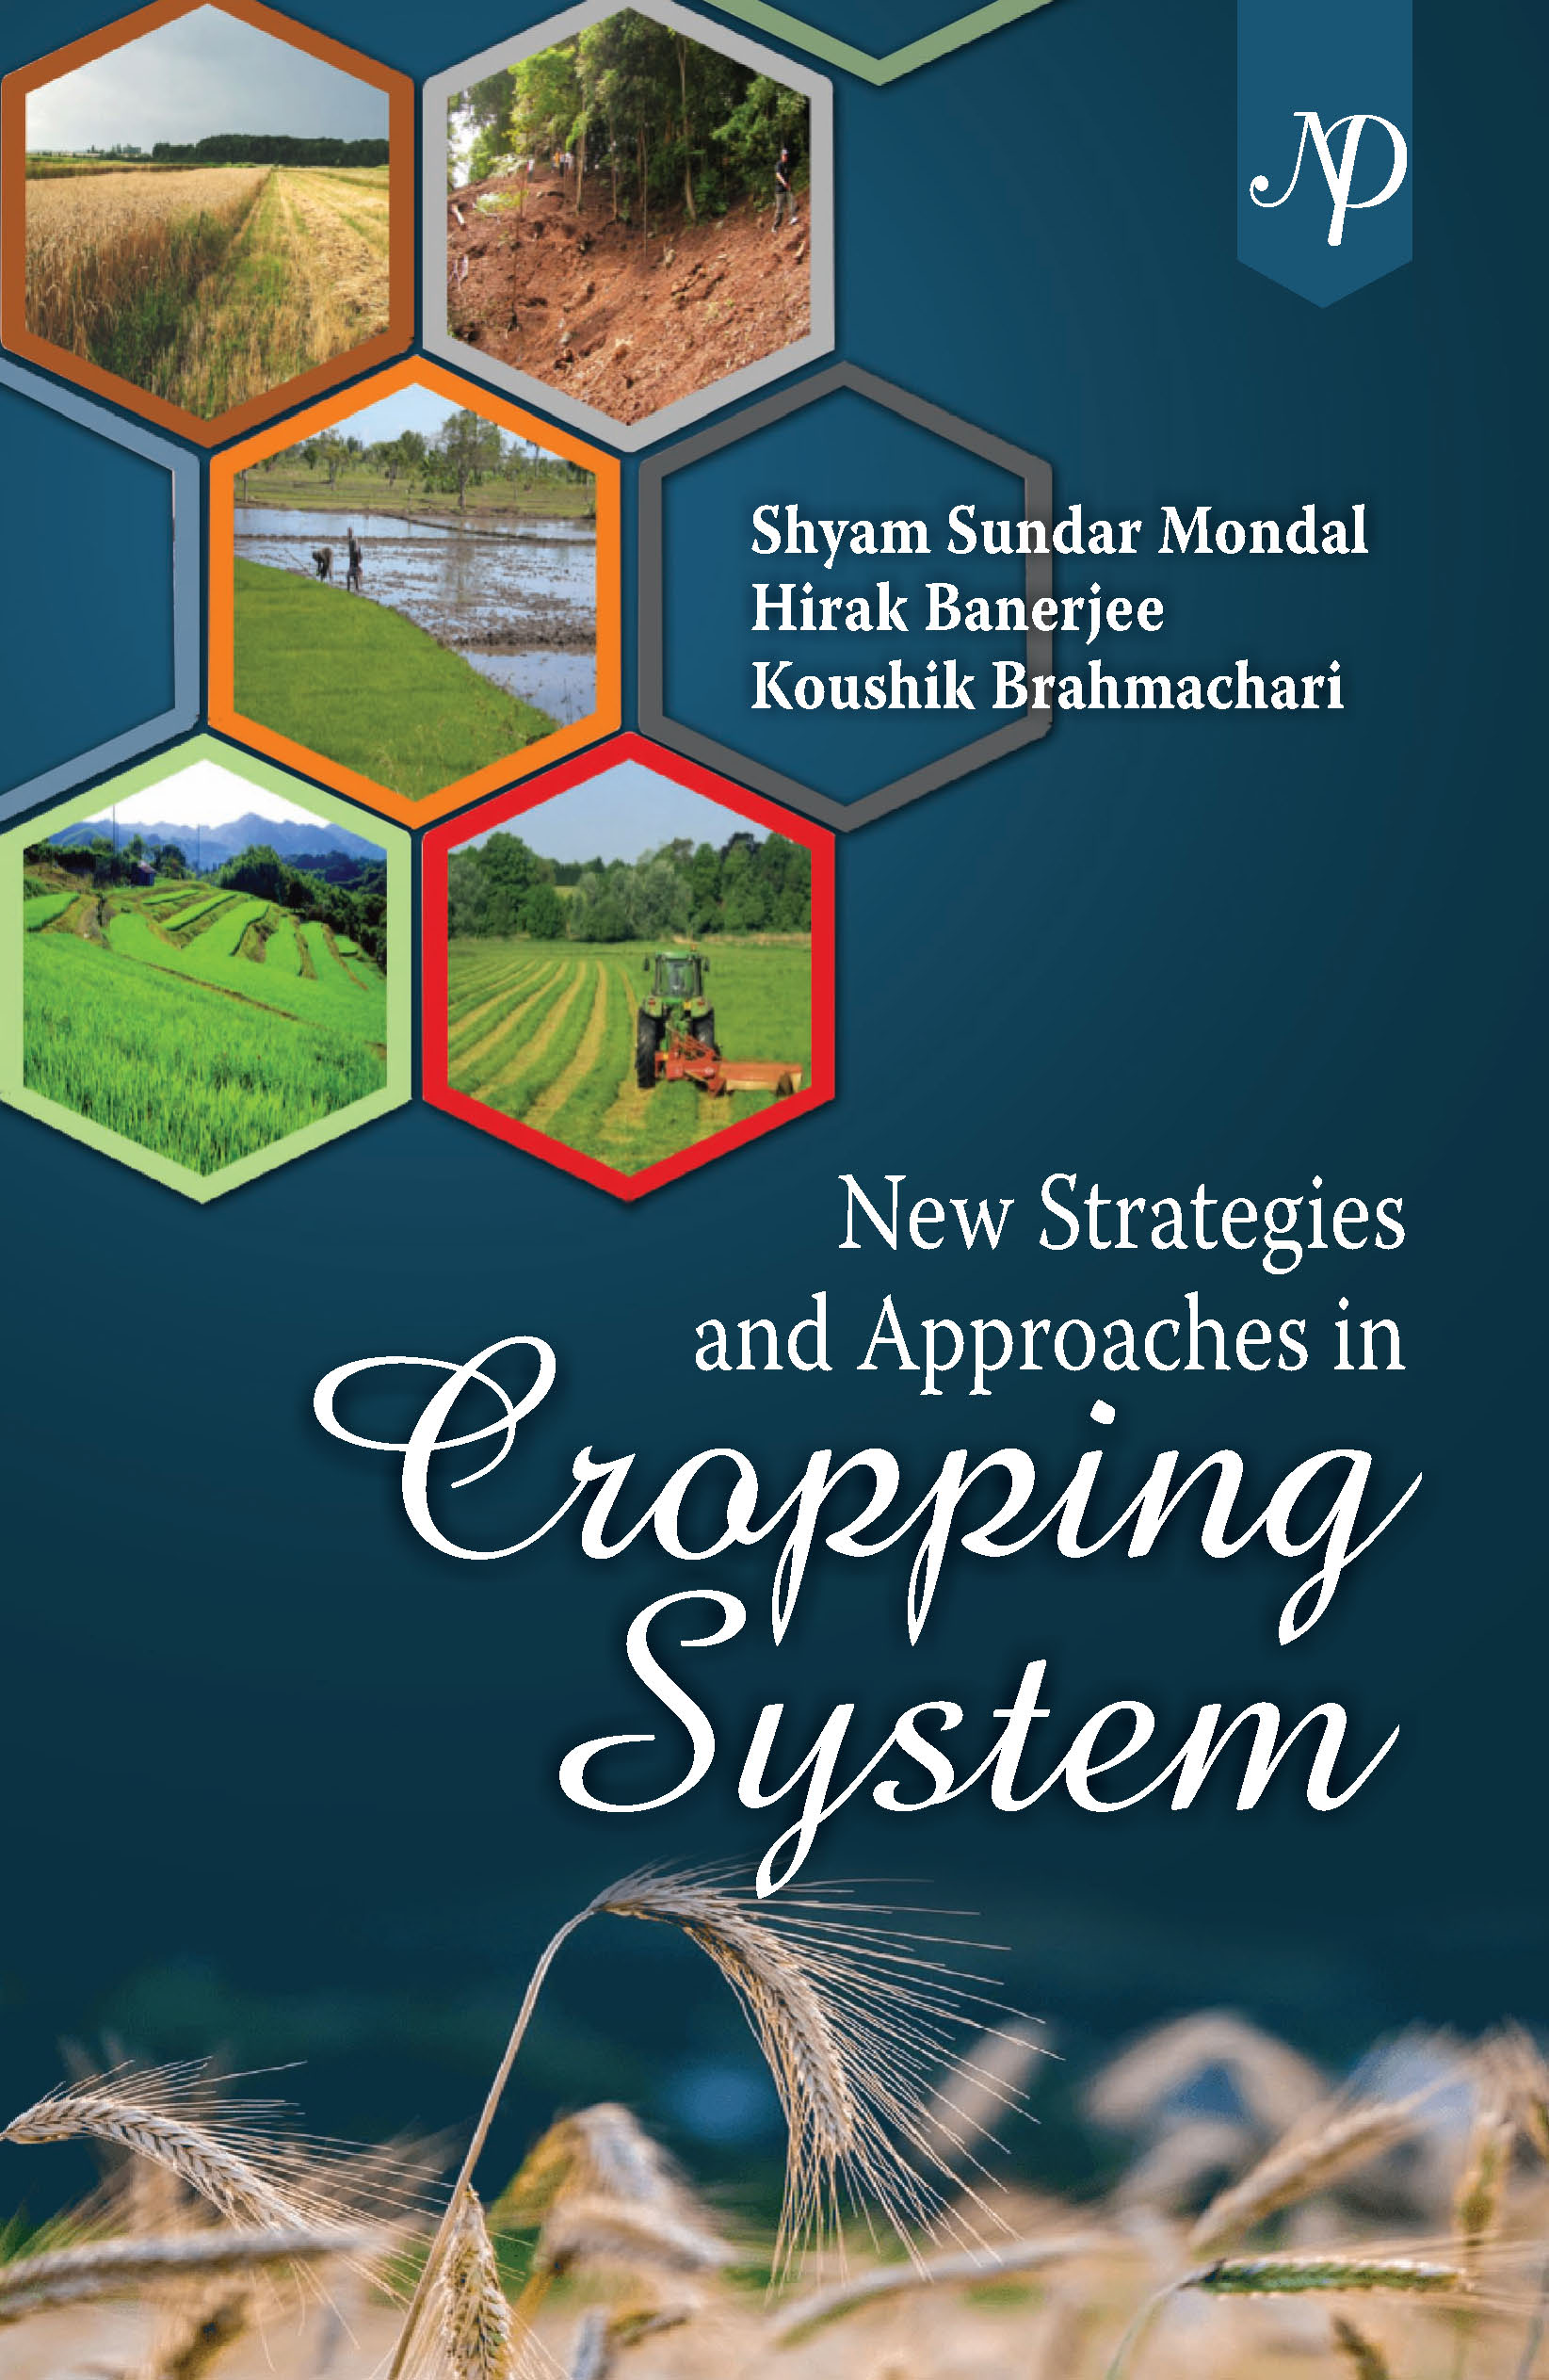 New Strategies and Approaches in Cropping System